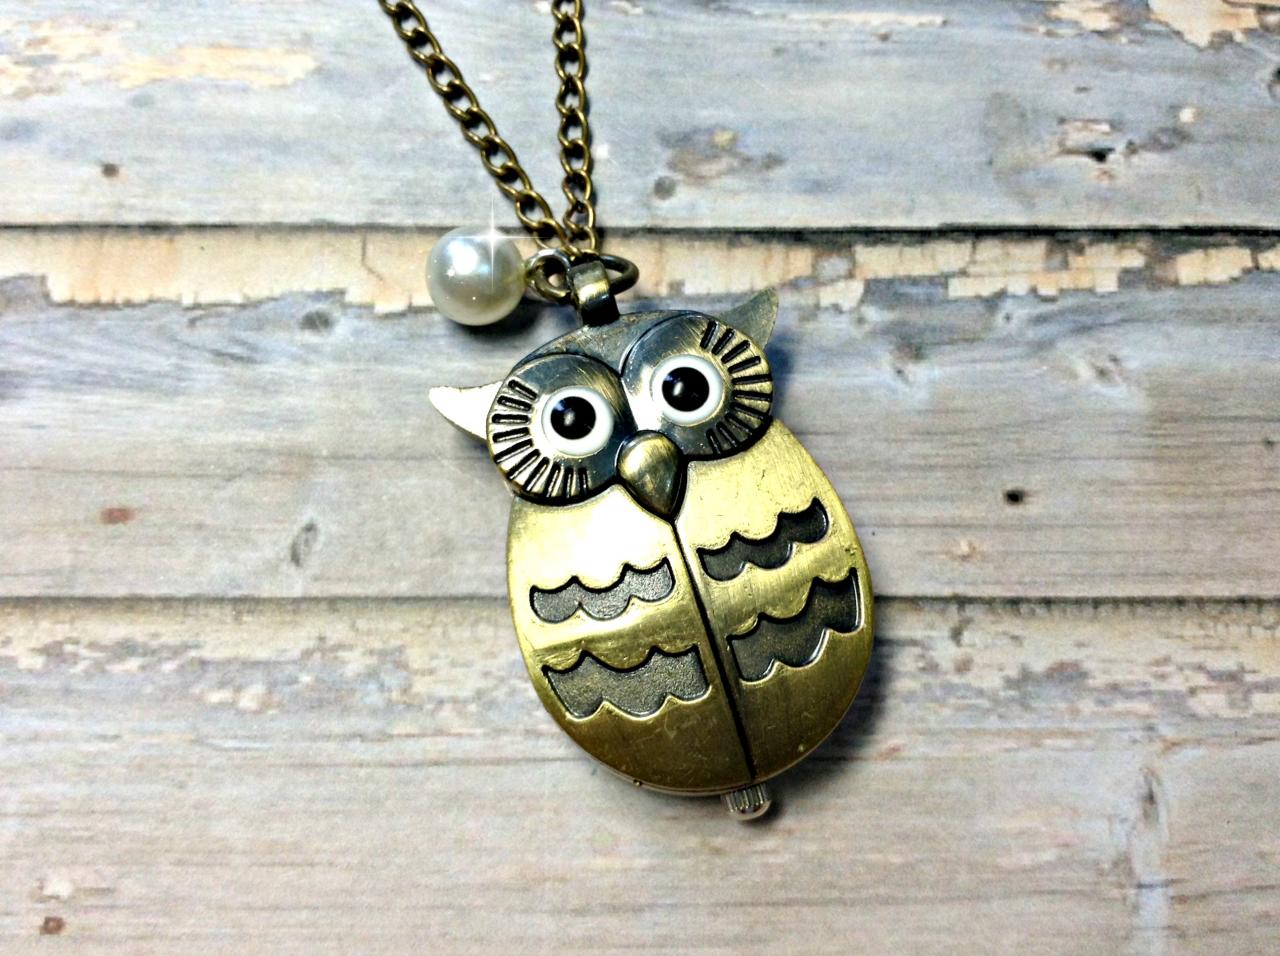 Handmade Vintage Owl Pocket Watch Necklace With Pearl Pendant